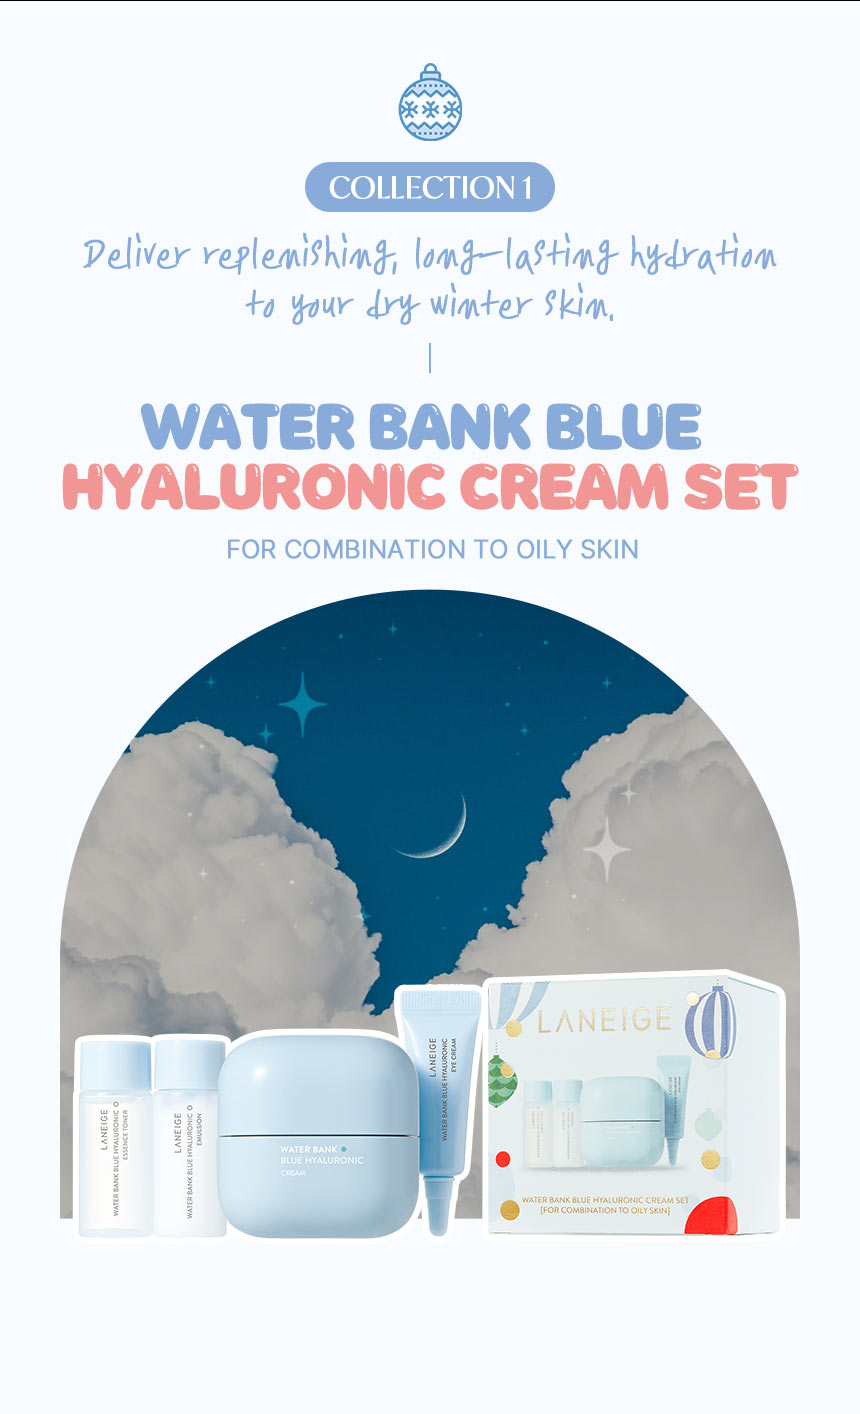 COLLECTION 1 - Deliver replenishing, long-lasting hydration to your dry winter skin./WATER BANK BLUE HYALURONIC CREAM SET/FOR COMBINATION TO OILY SKIN